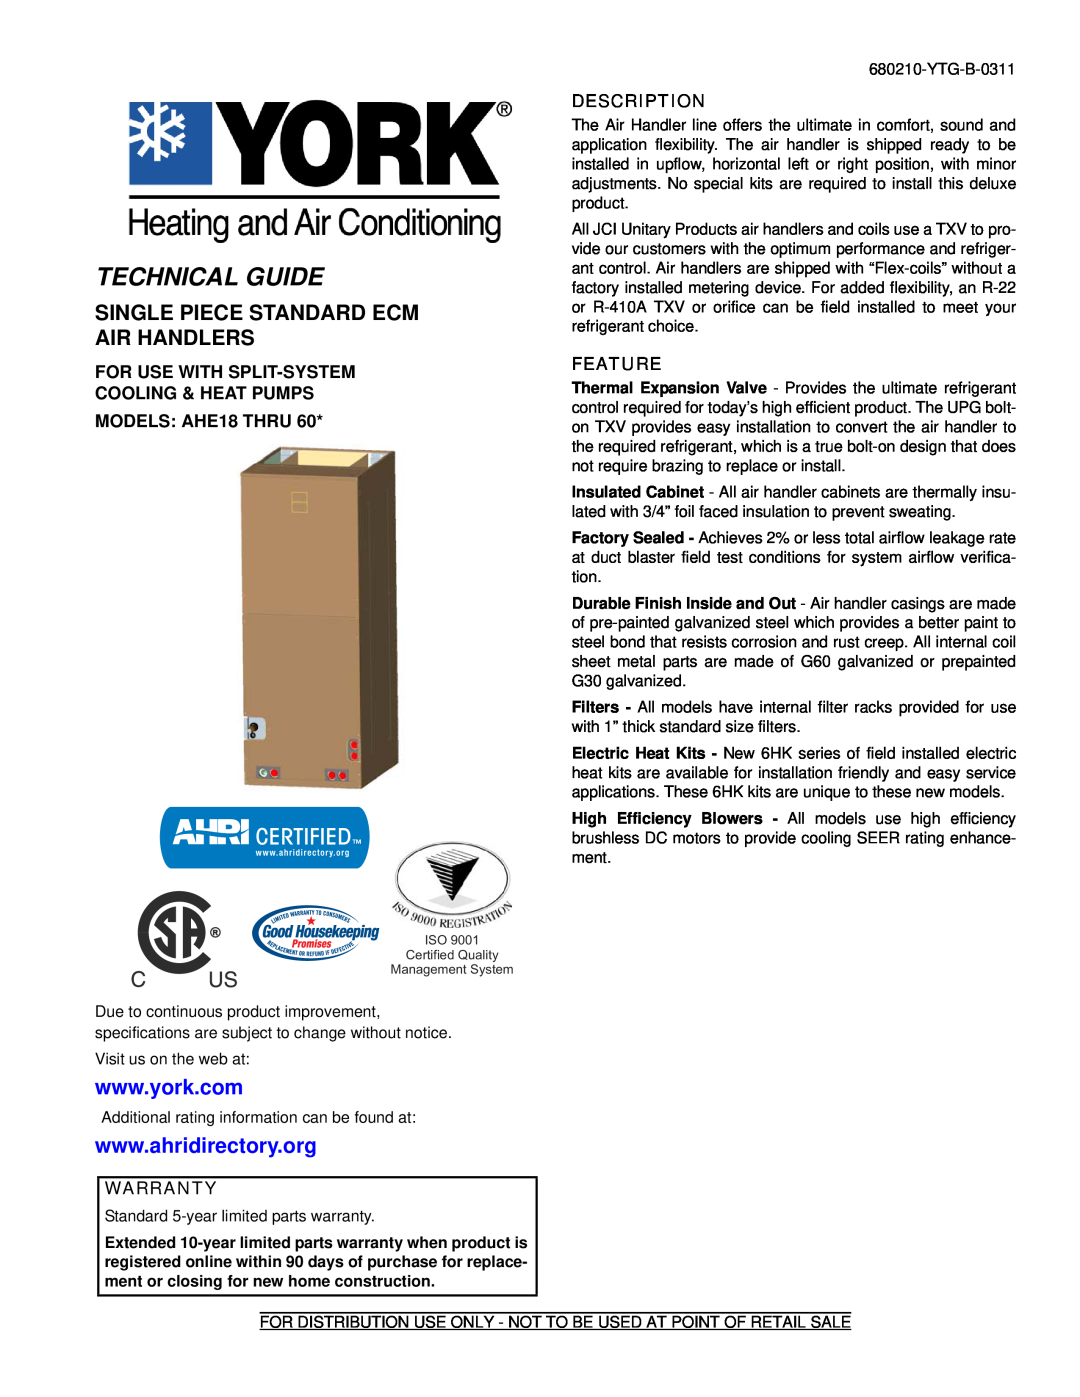 York AHE18 THRU 60 warranty For Use With Split-System Cooling & Heat Pumps, MODELS AHE18 THRU, Description, Feature 